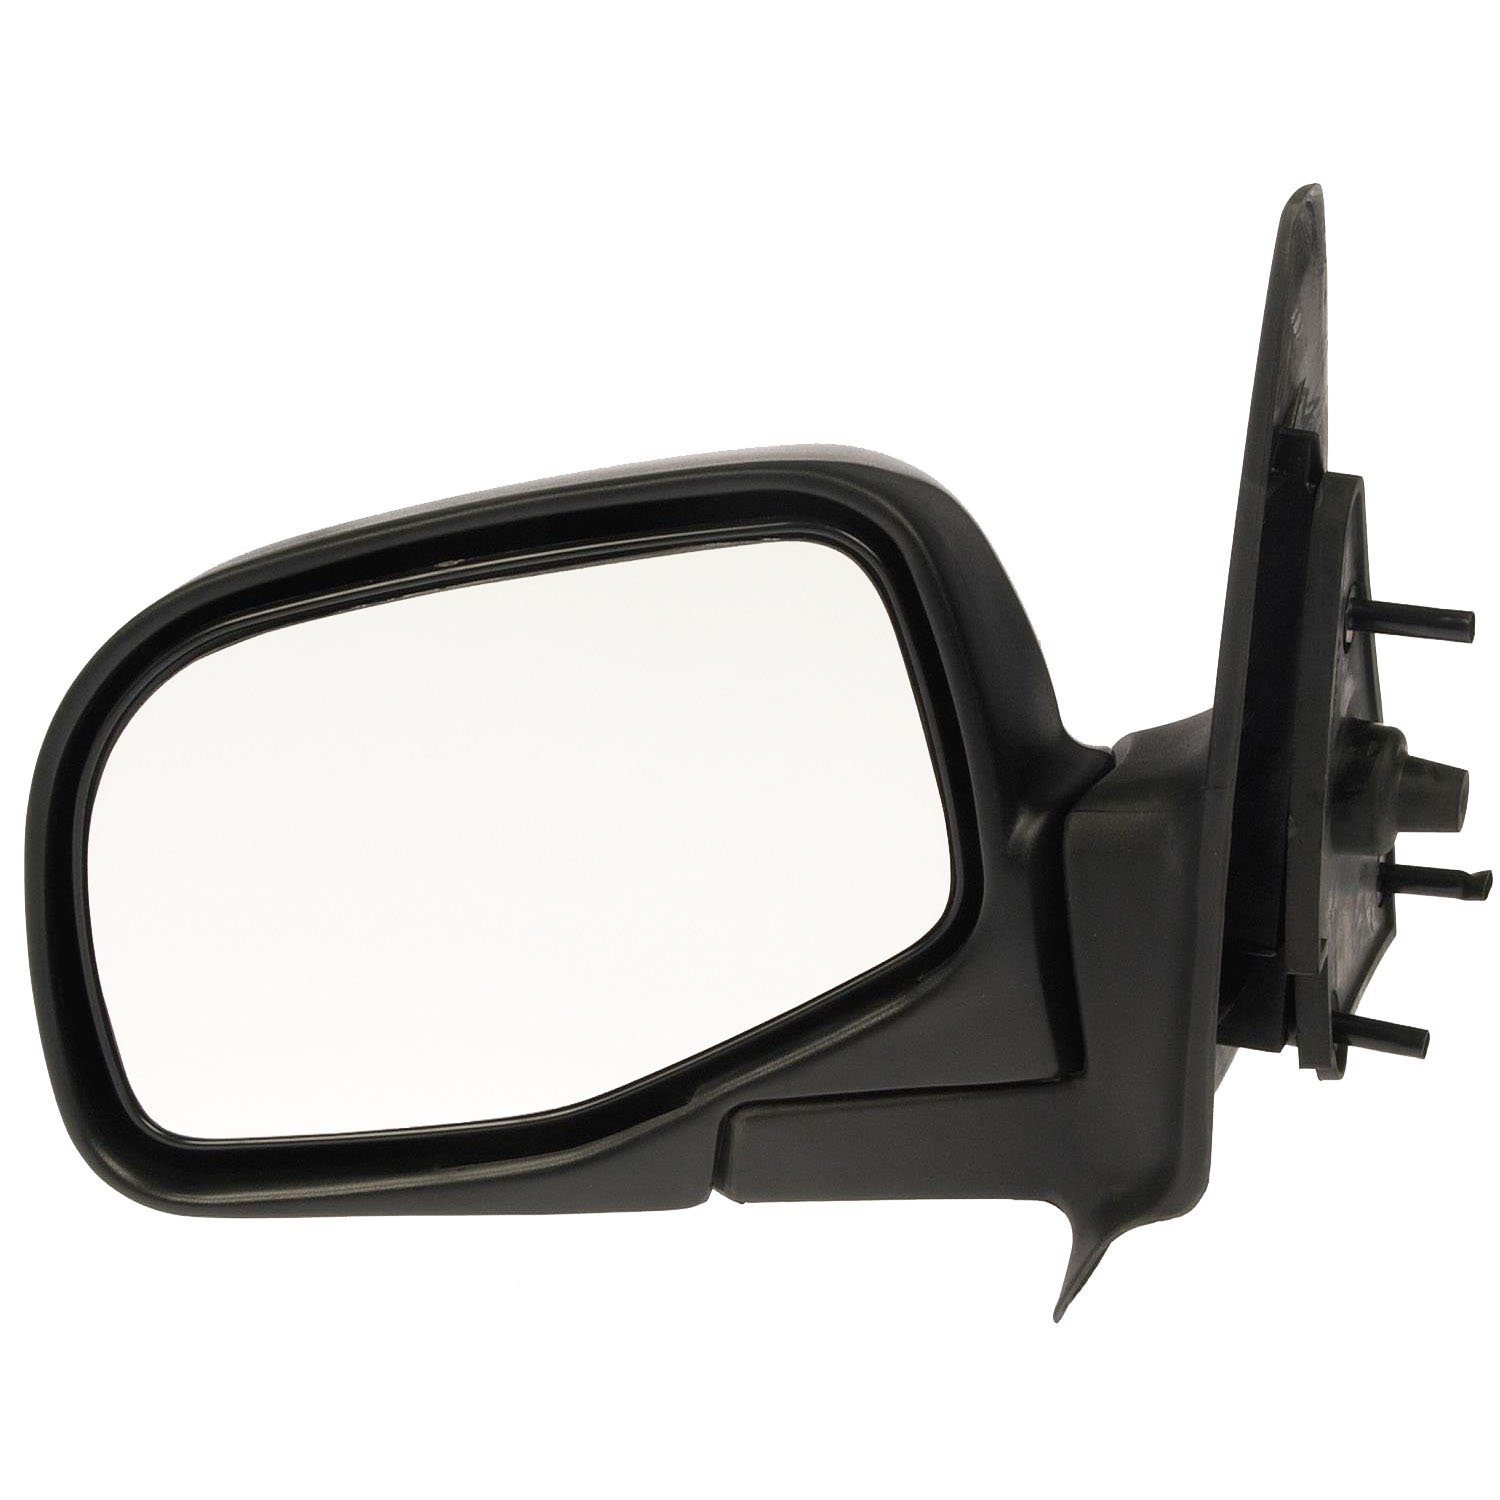 Manual Sideview Mirror for 1998-2002 Ford Ranger [Left/Driver